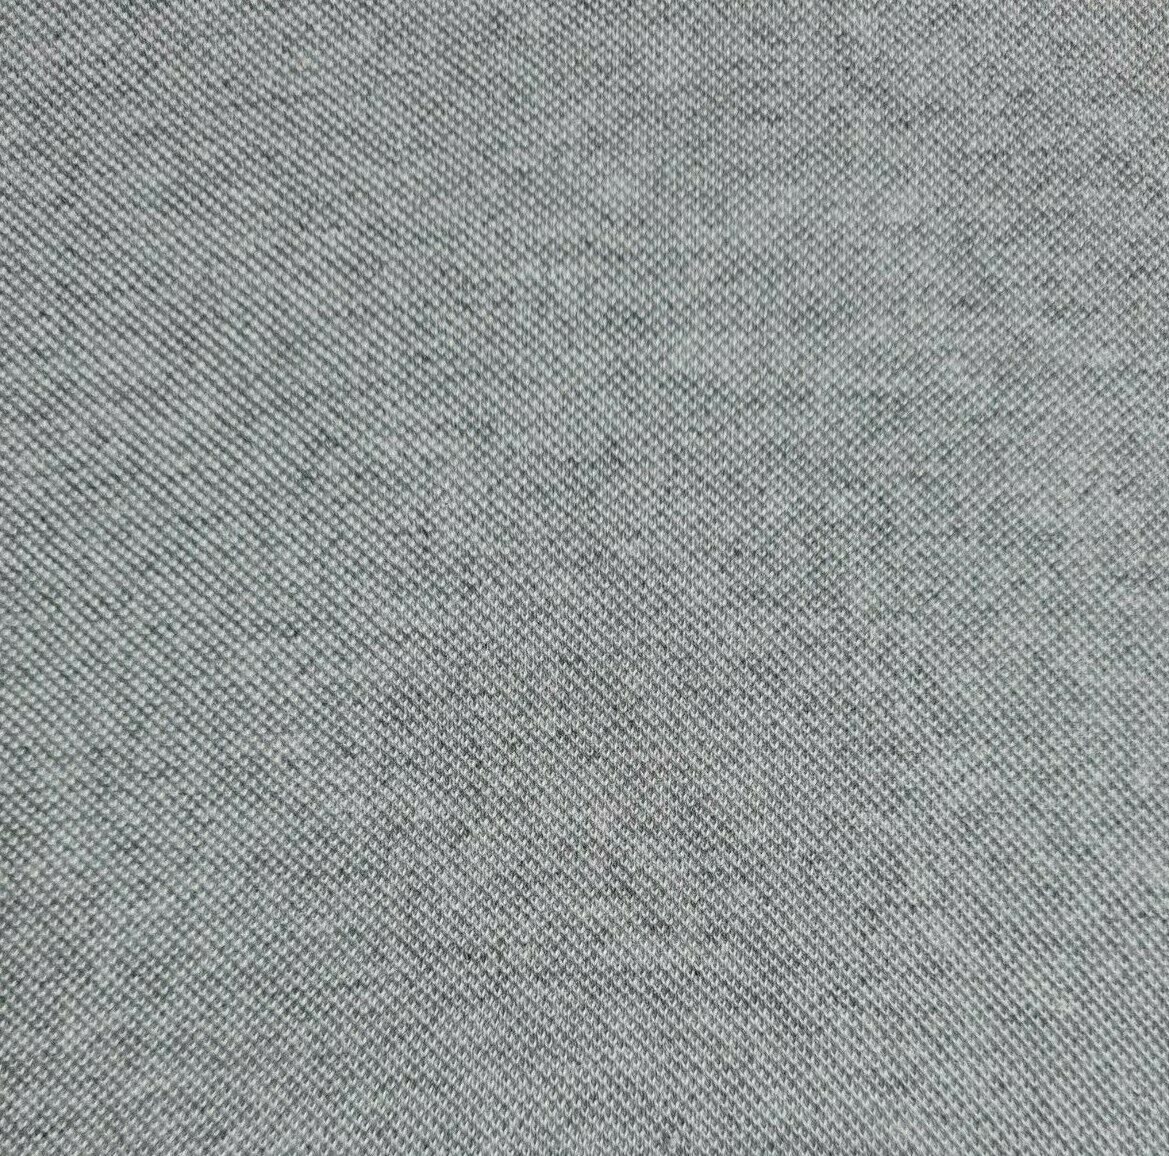 Jersey Knit Fabric Pique Polo T-Shirt 7 Colours Plain 70" Wide Sold By The Metre